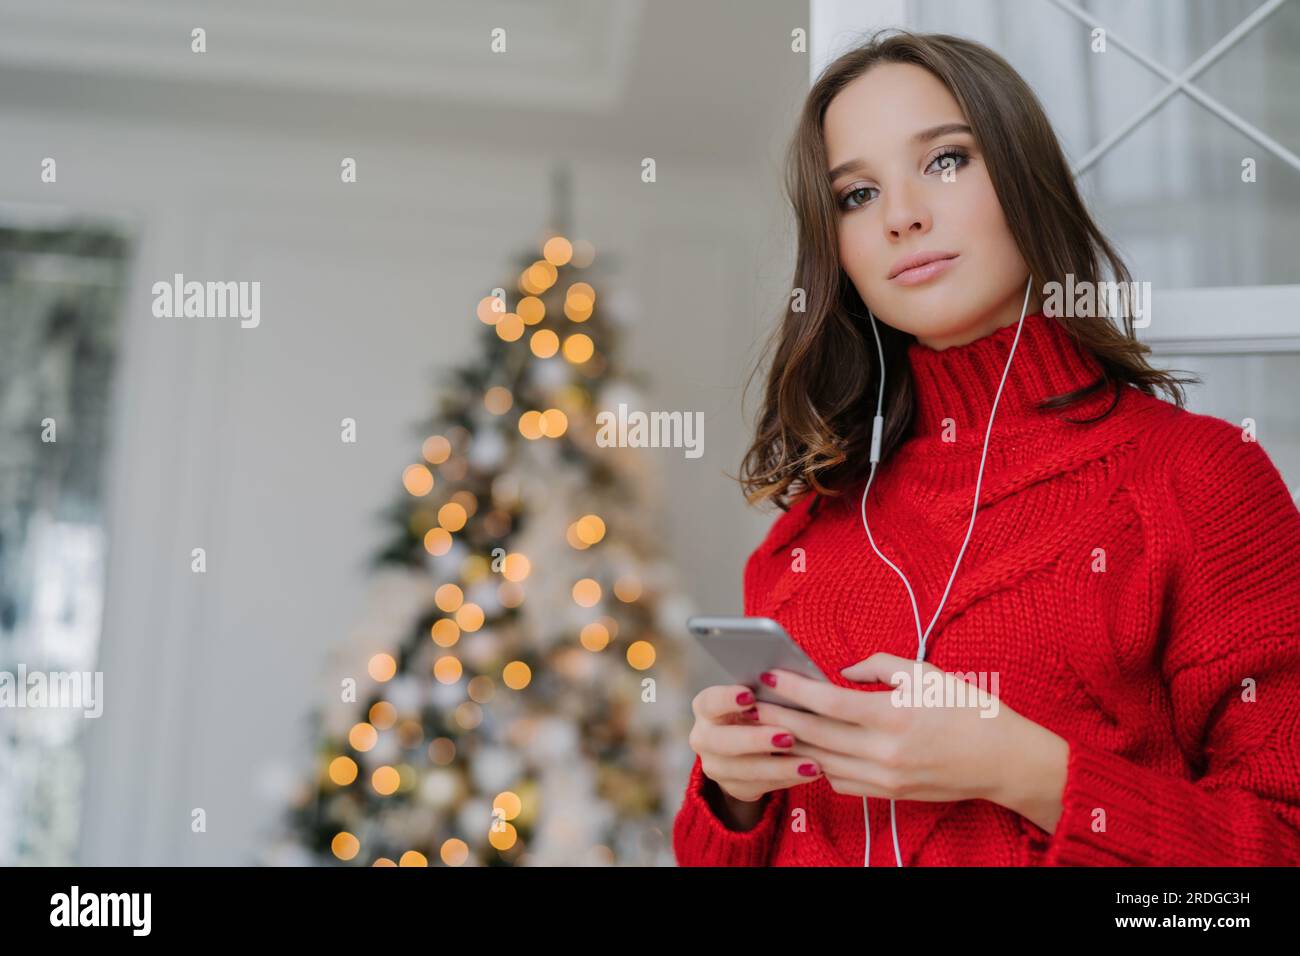 European girl with makeup, healthy skin, in oversized sweater, listens to audio book by Christmas tree. Stock Photo